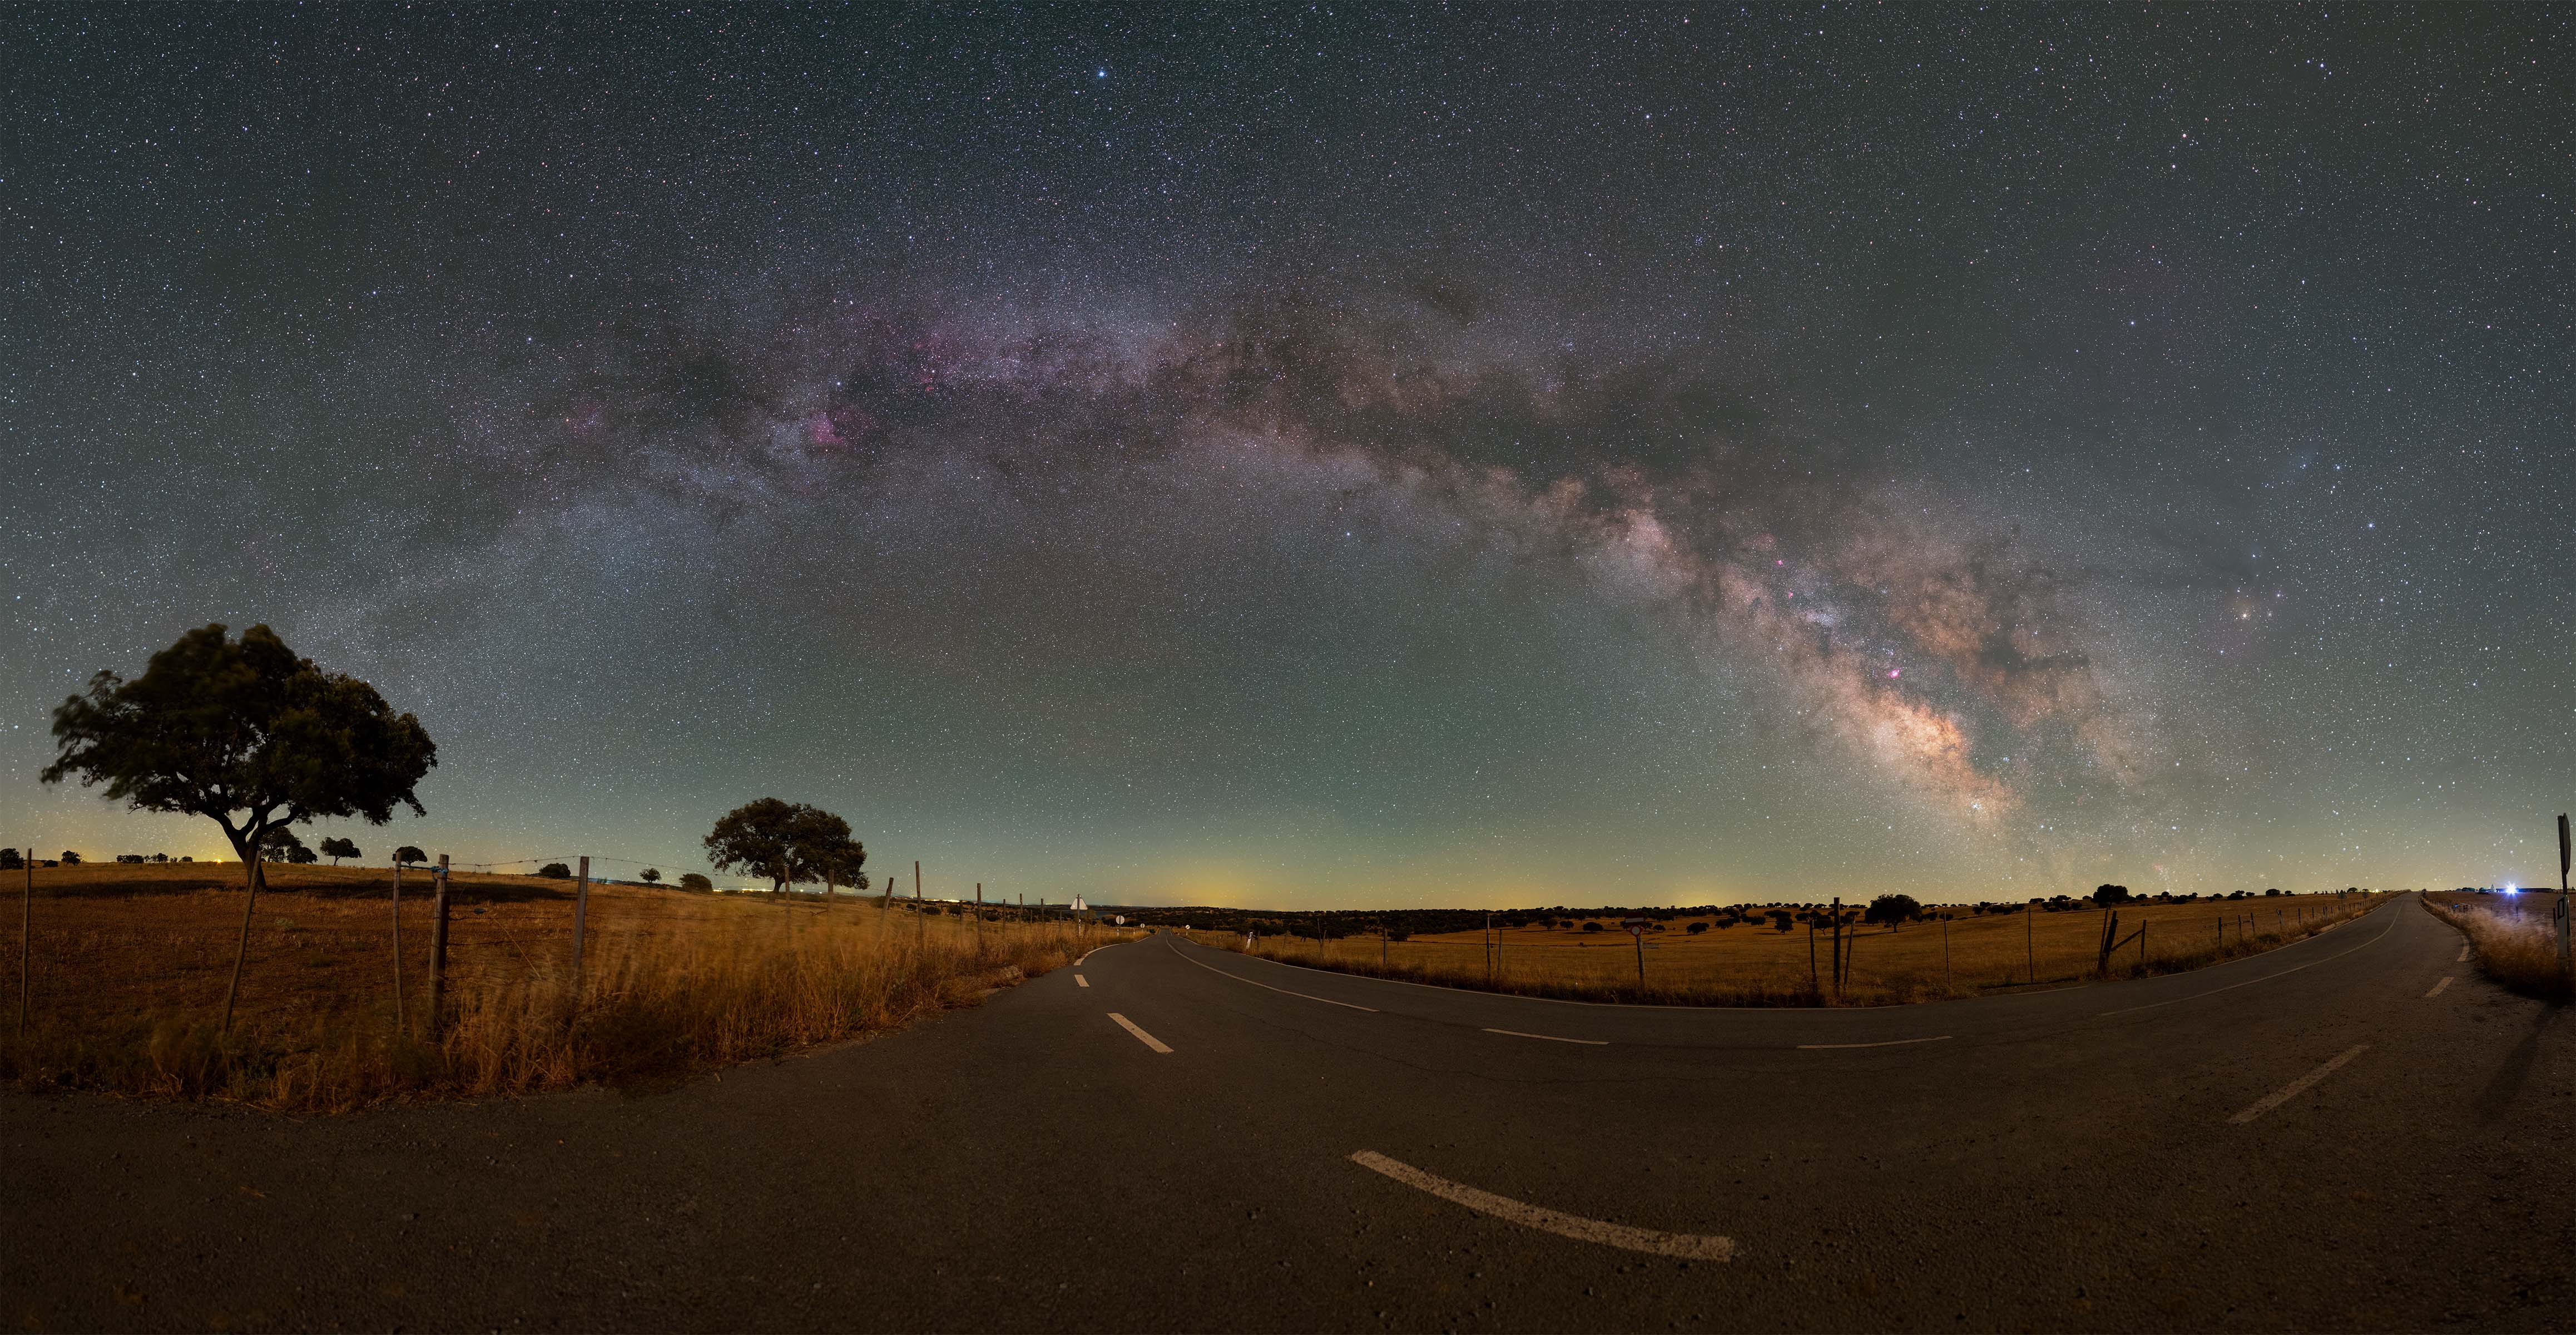 The Road and the Milky Way